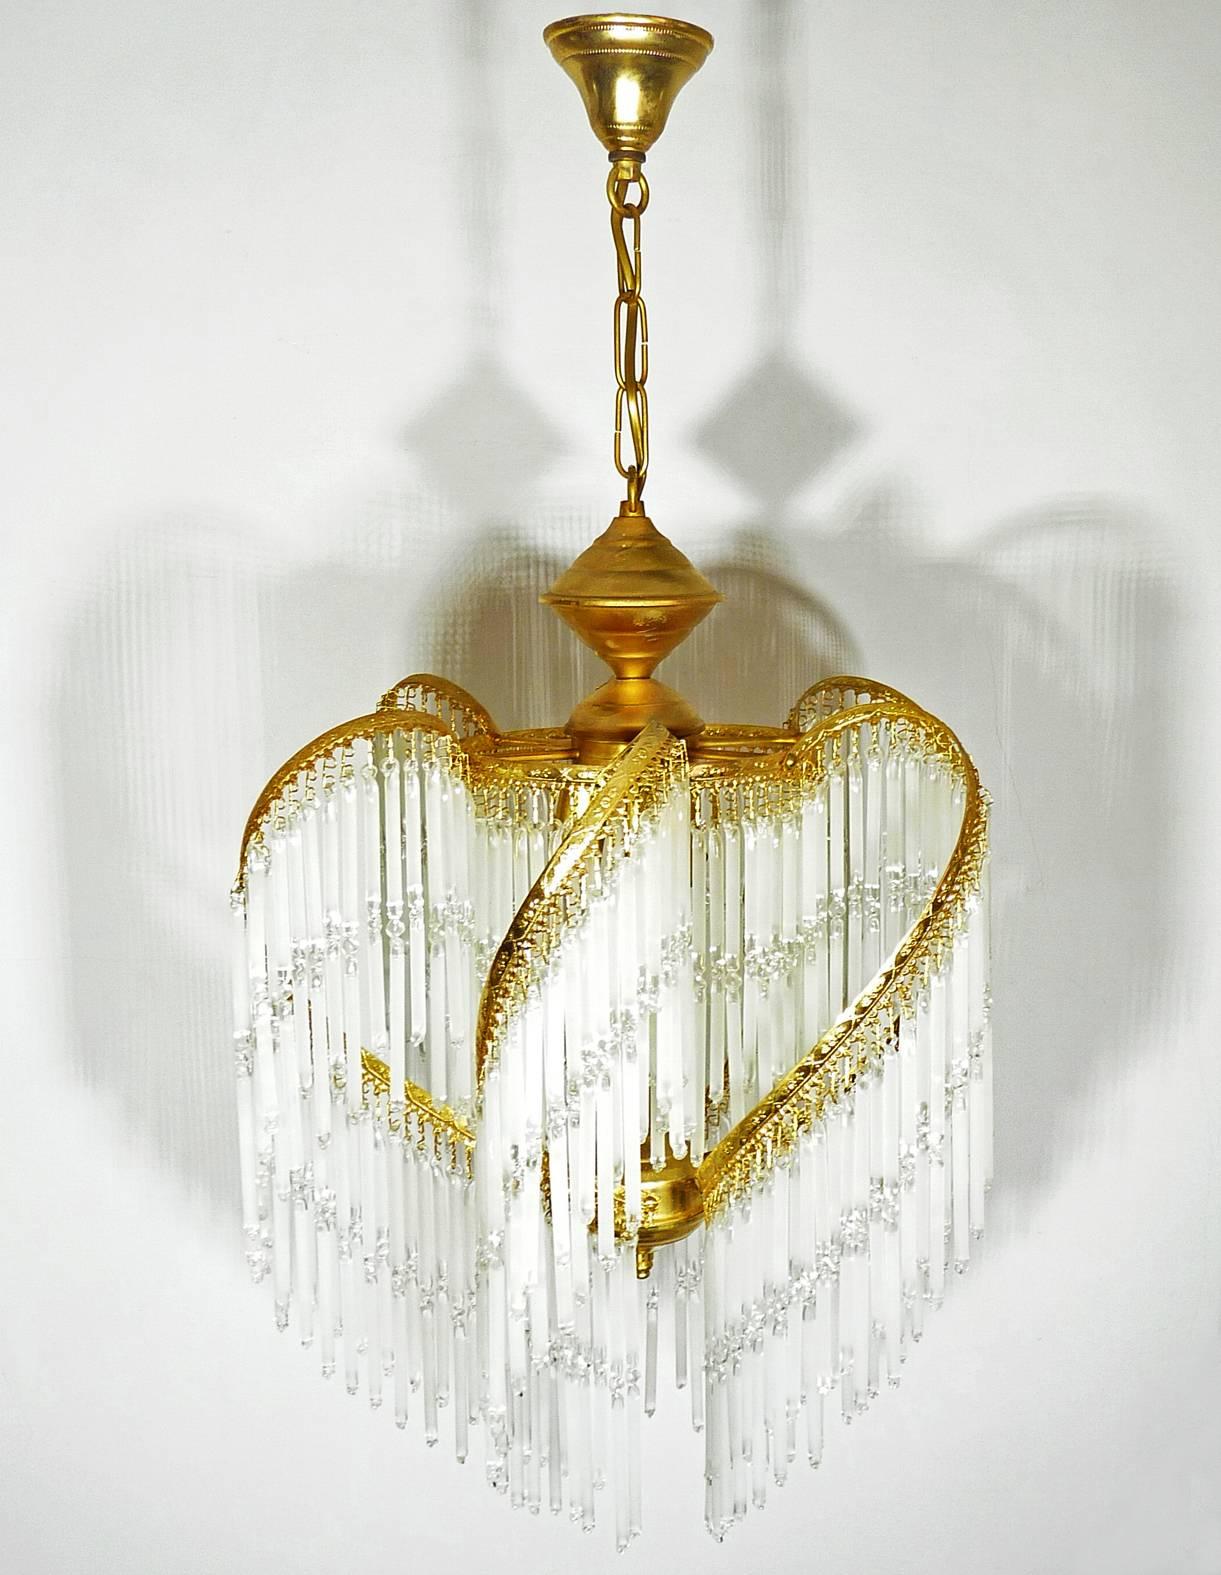 Fabulous midcentury Art Deco or Art Nouveau frosted and clear crystal glass fringe gilt chandelier.
Measures:
Diameter 16 in/ 40 cm
Height 32 in/ 80 cm
Weight: 8 lb/ 4 Kg
Three light bulbs E14/ Good working condition/European wiring.
Your item will